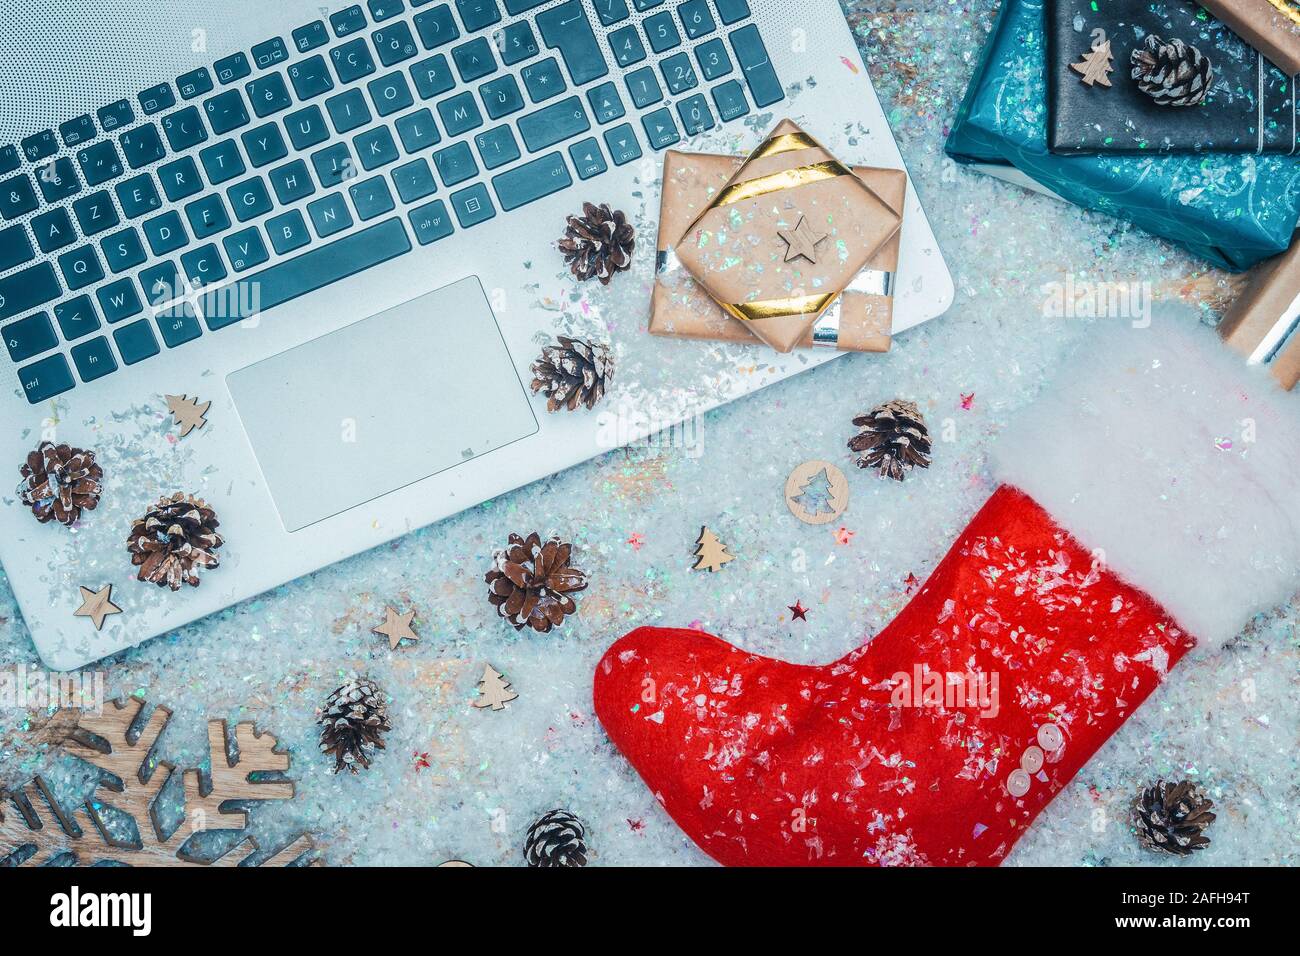 Flat lay or top view of laptop keyboard, gifts and red Santa Claus sock on fake snow. Online shopping for christmas holiday concepts. Stock Photo